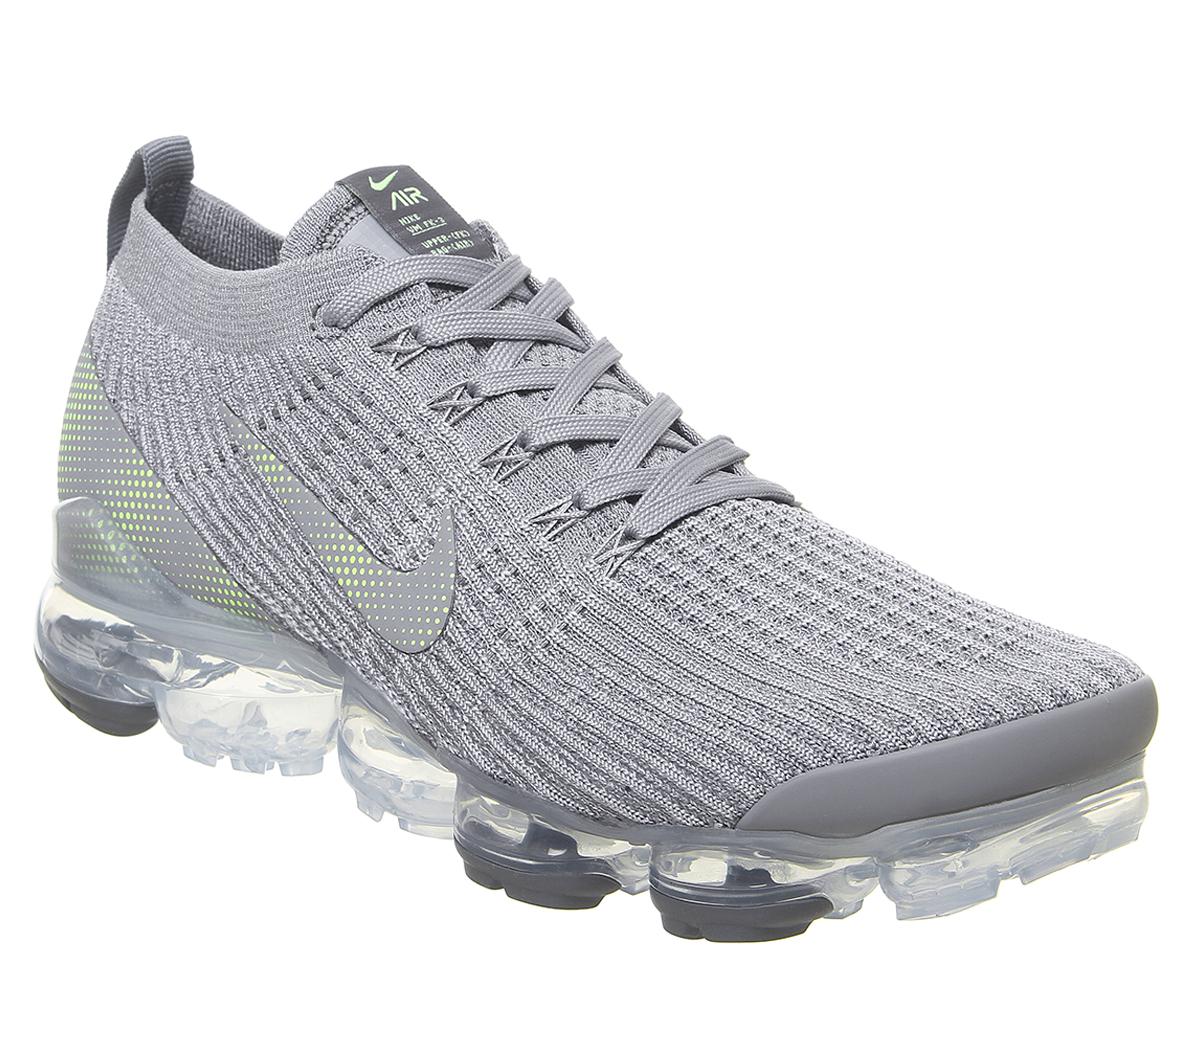 NikeAir Vapormax Fk 3 TrainersParticle Grey Ghost Green Iron Grey